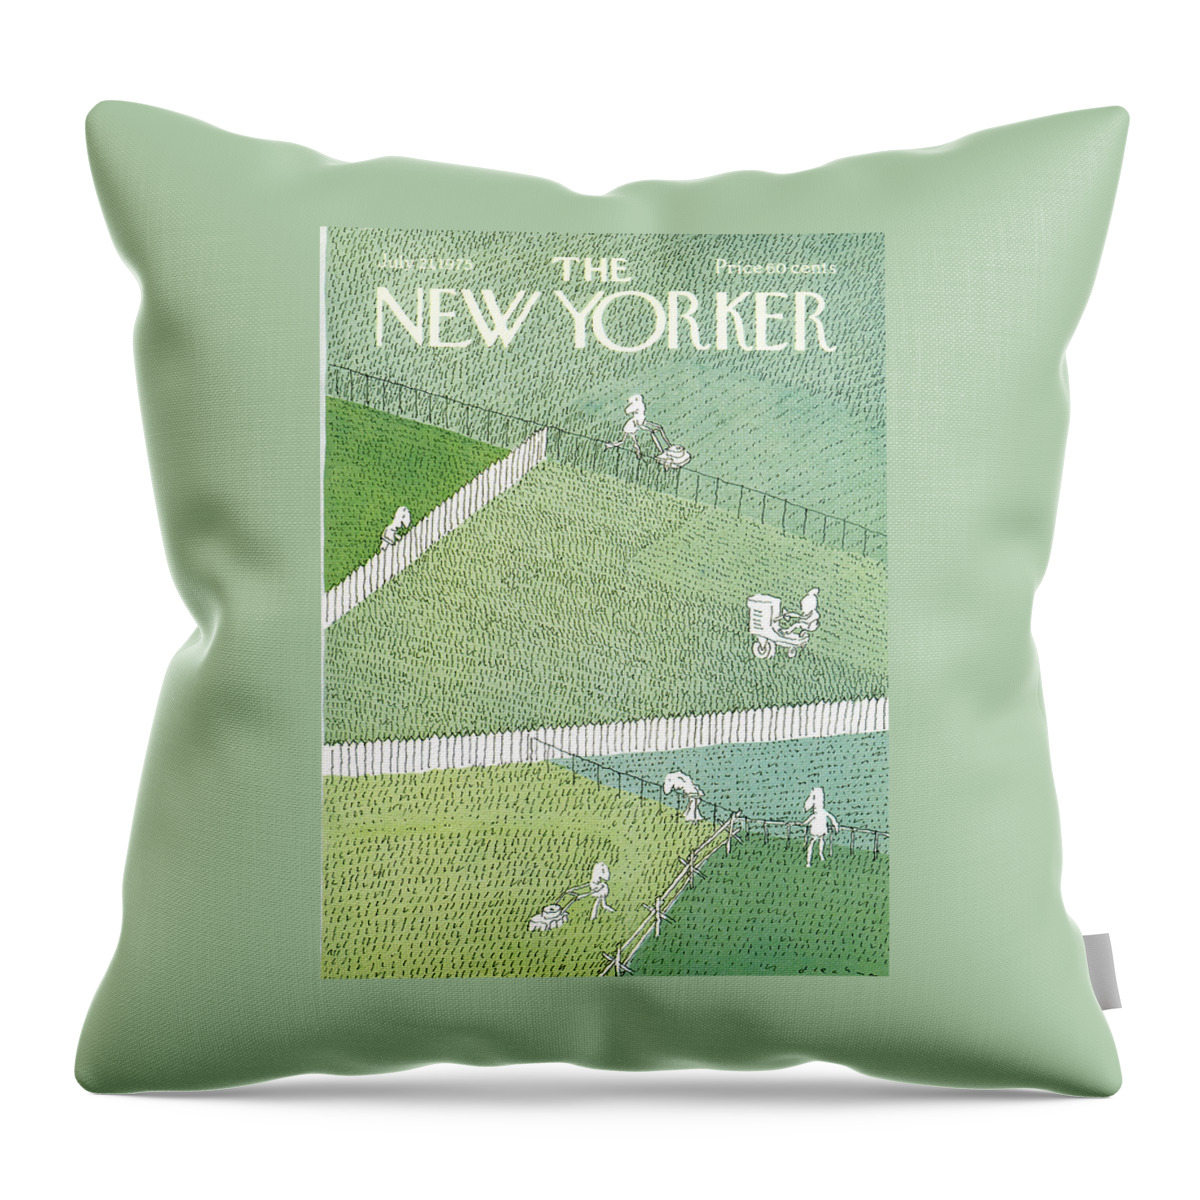 New Yorker July 21st, 1975 Throw Pillow